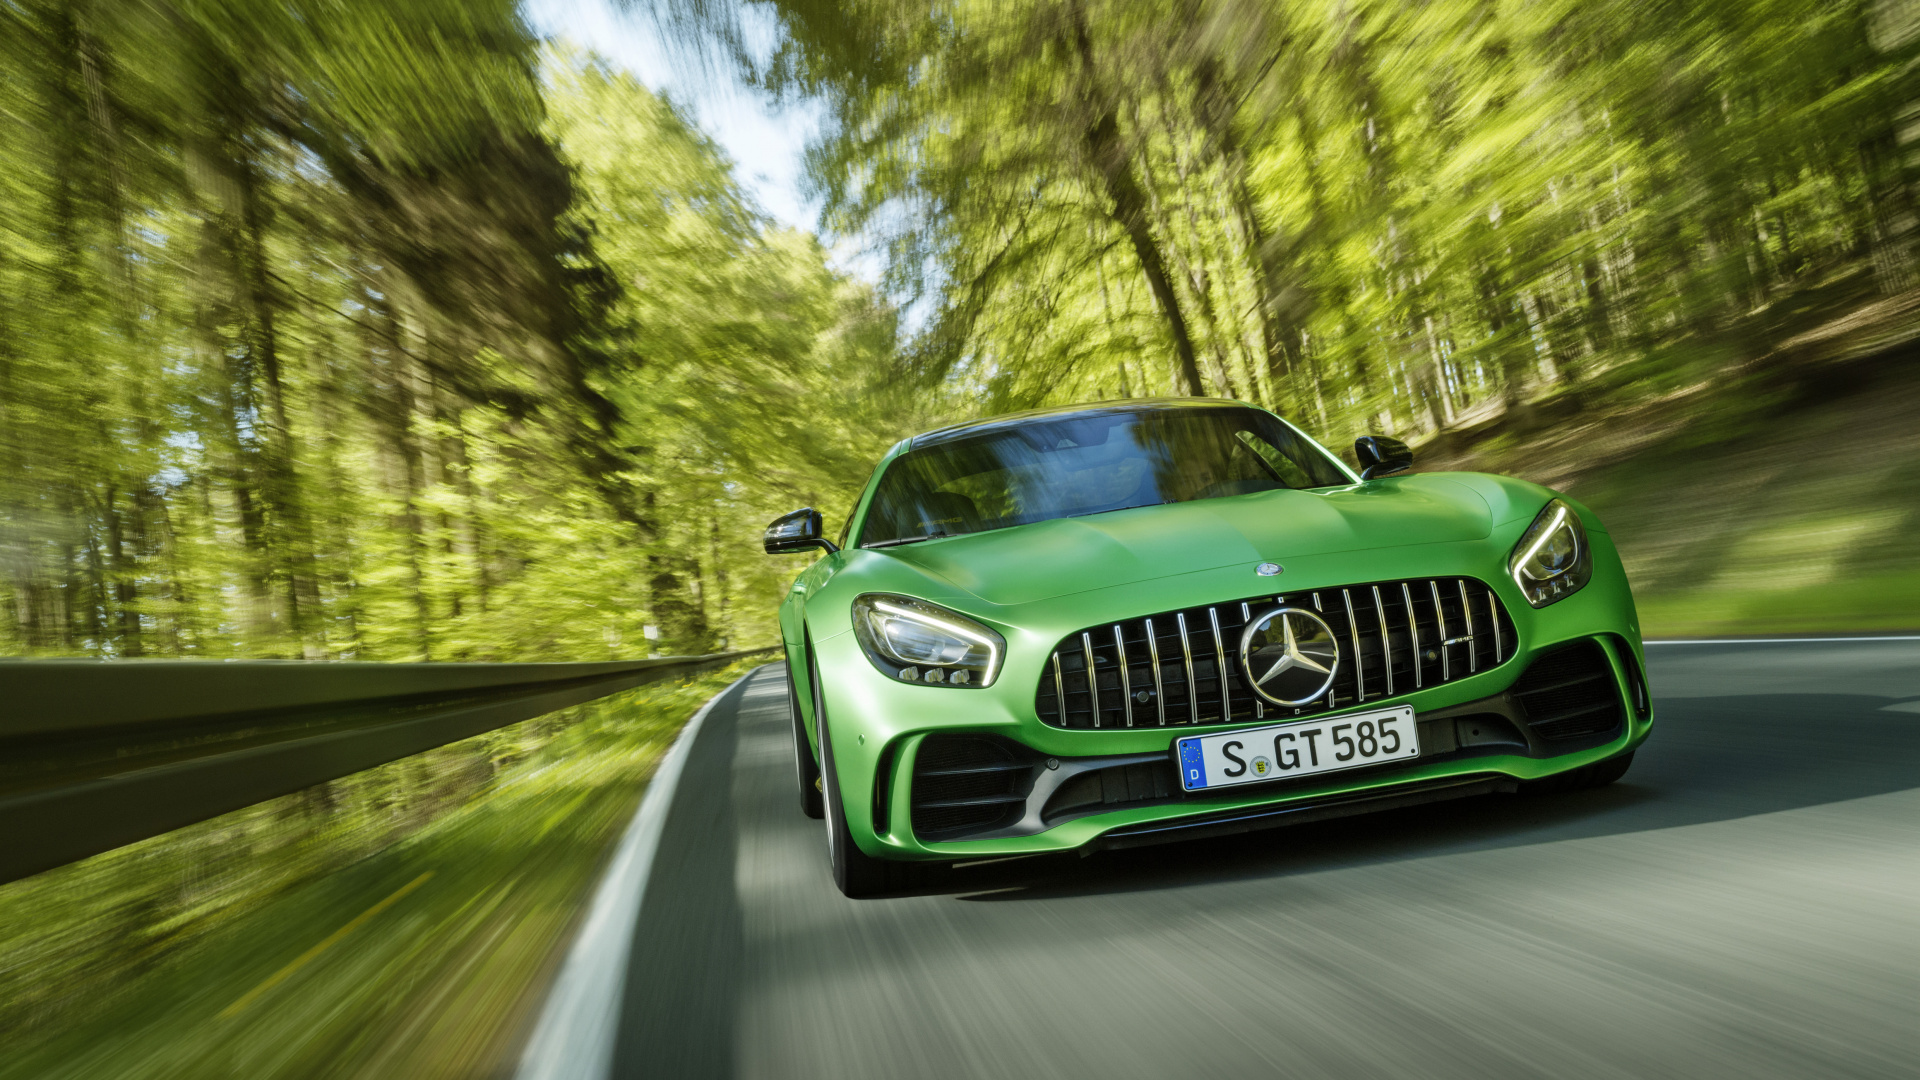 Green Mercedes Benz Car on Road During Daytime. Wallpaper in 1920x1080 Resolution